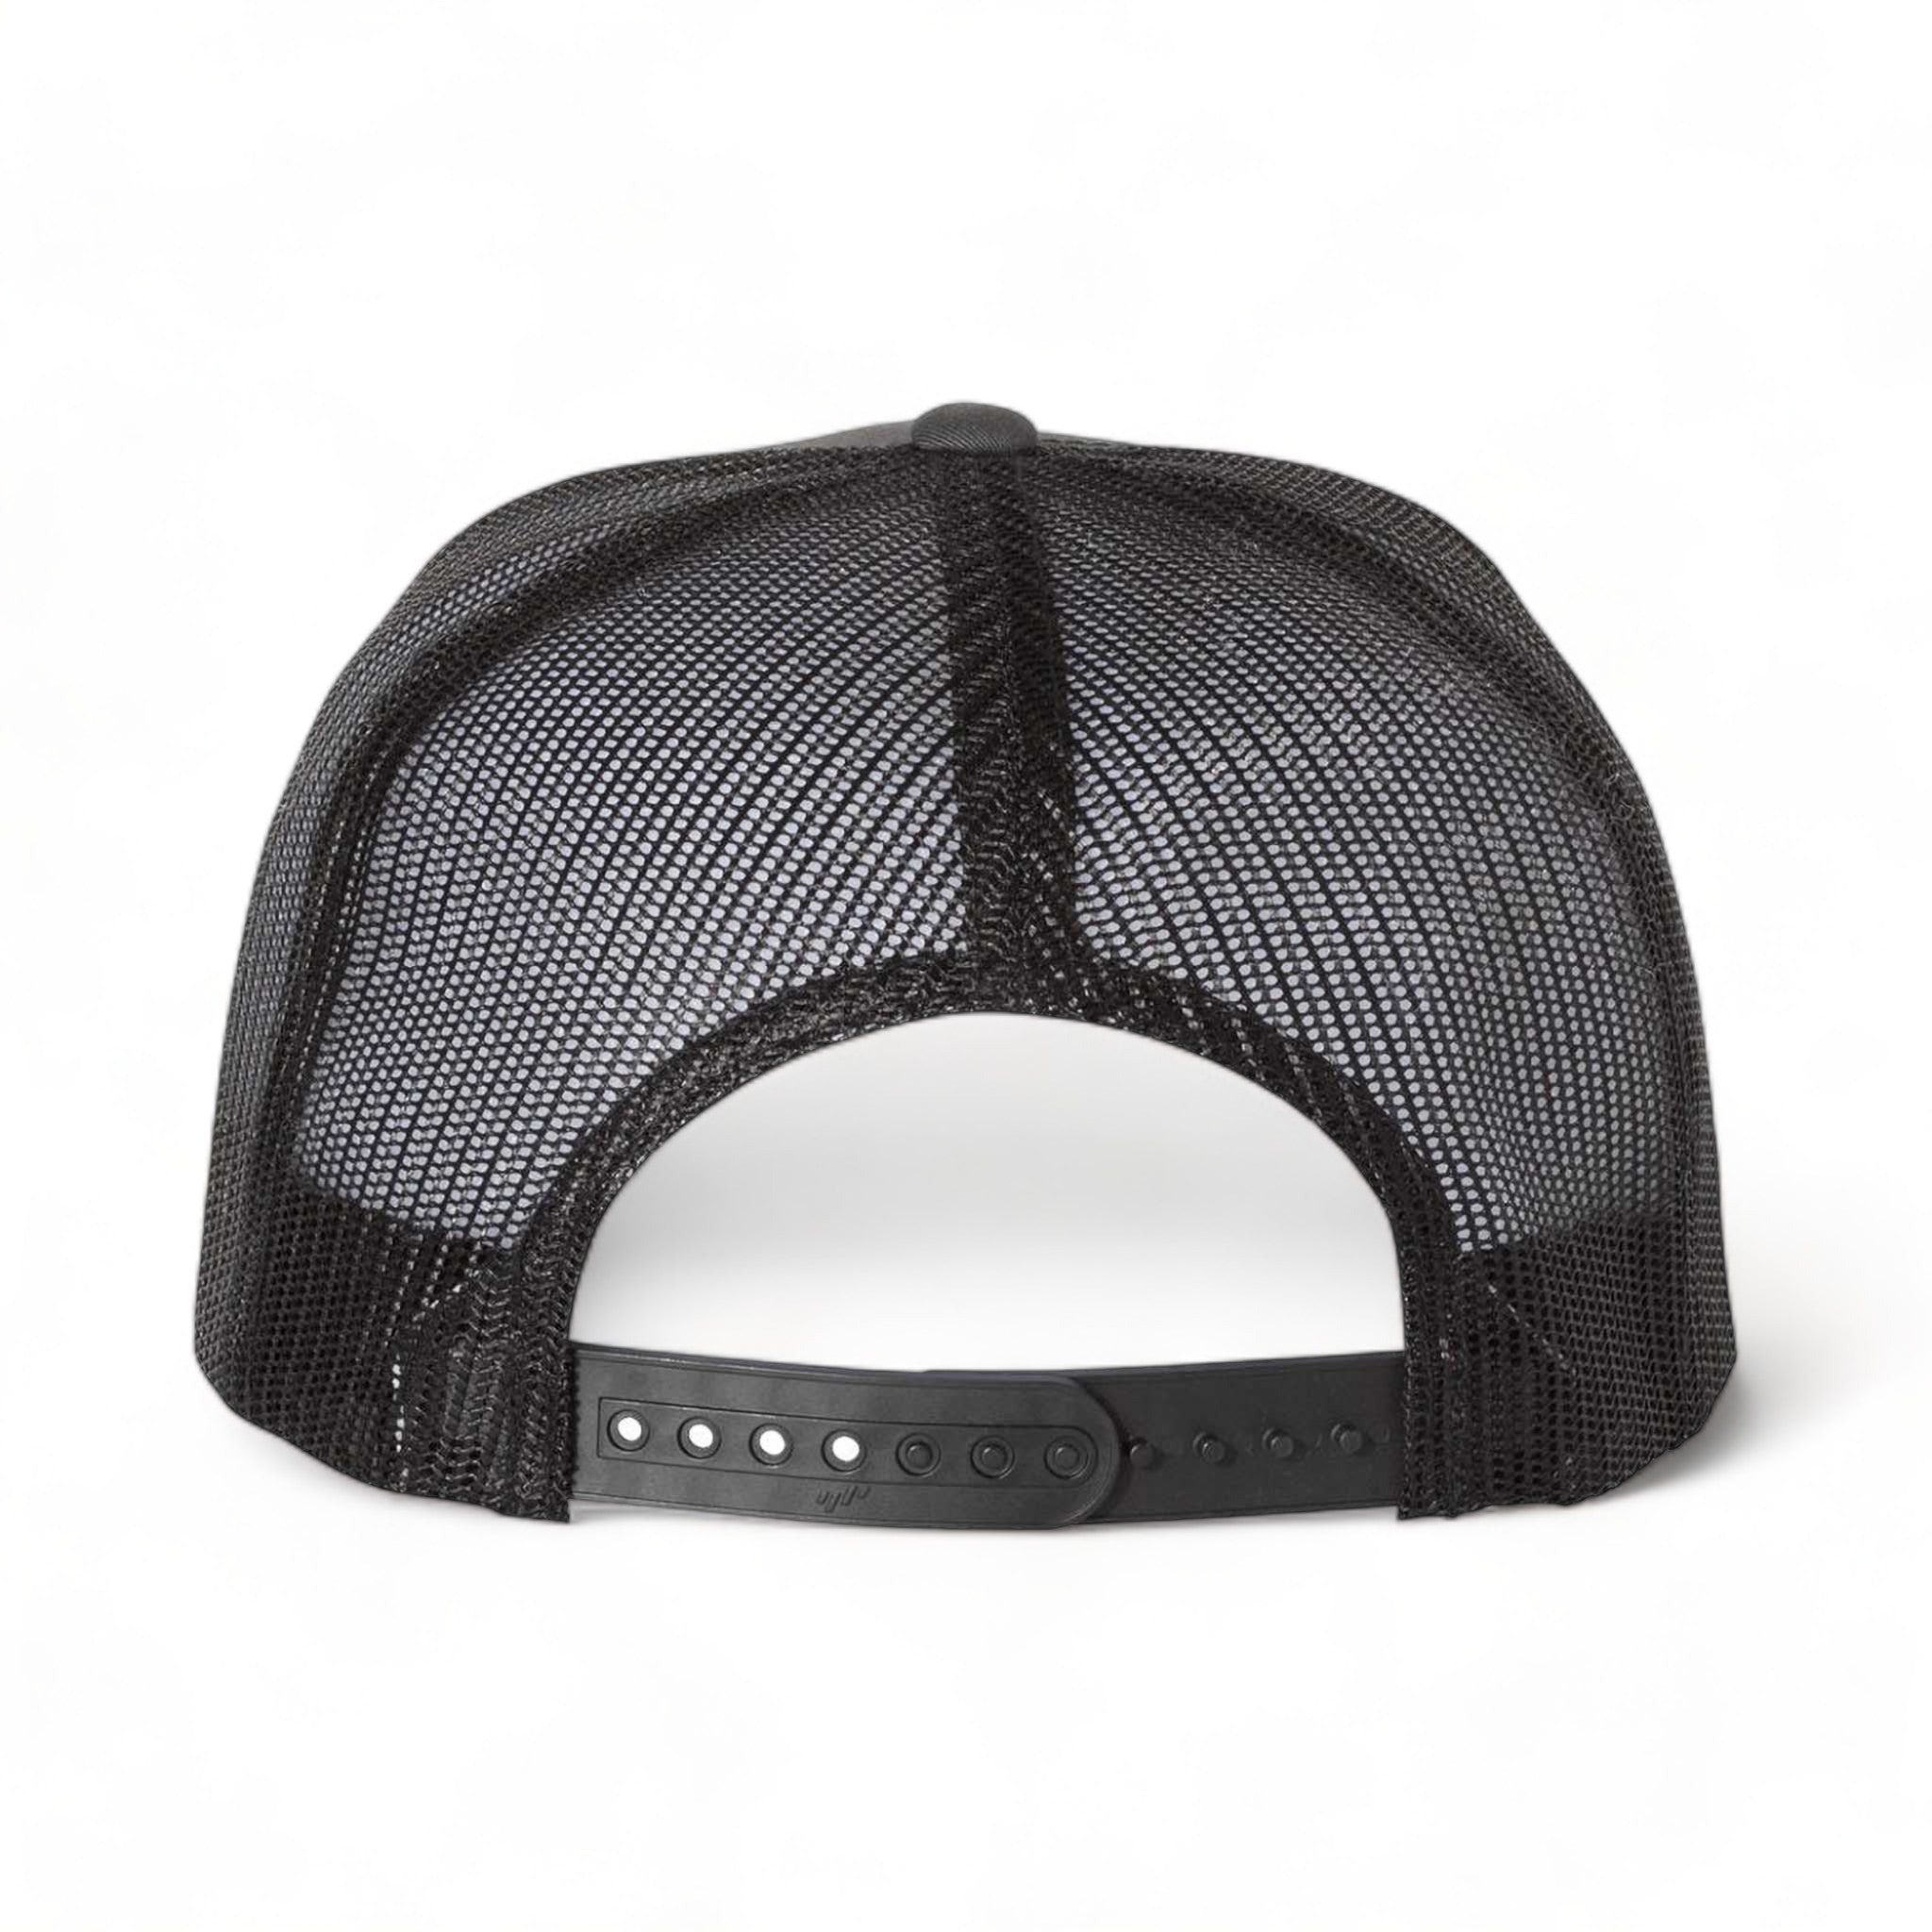 Back view of YP Classics 6006 custom hat in charcoal and black